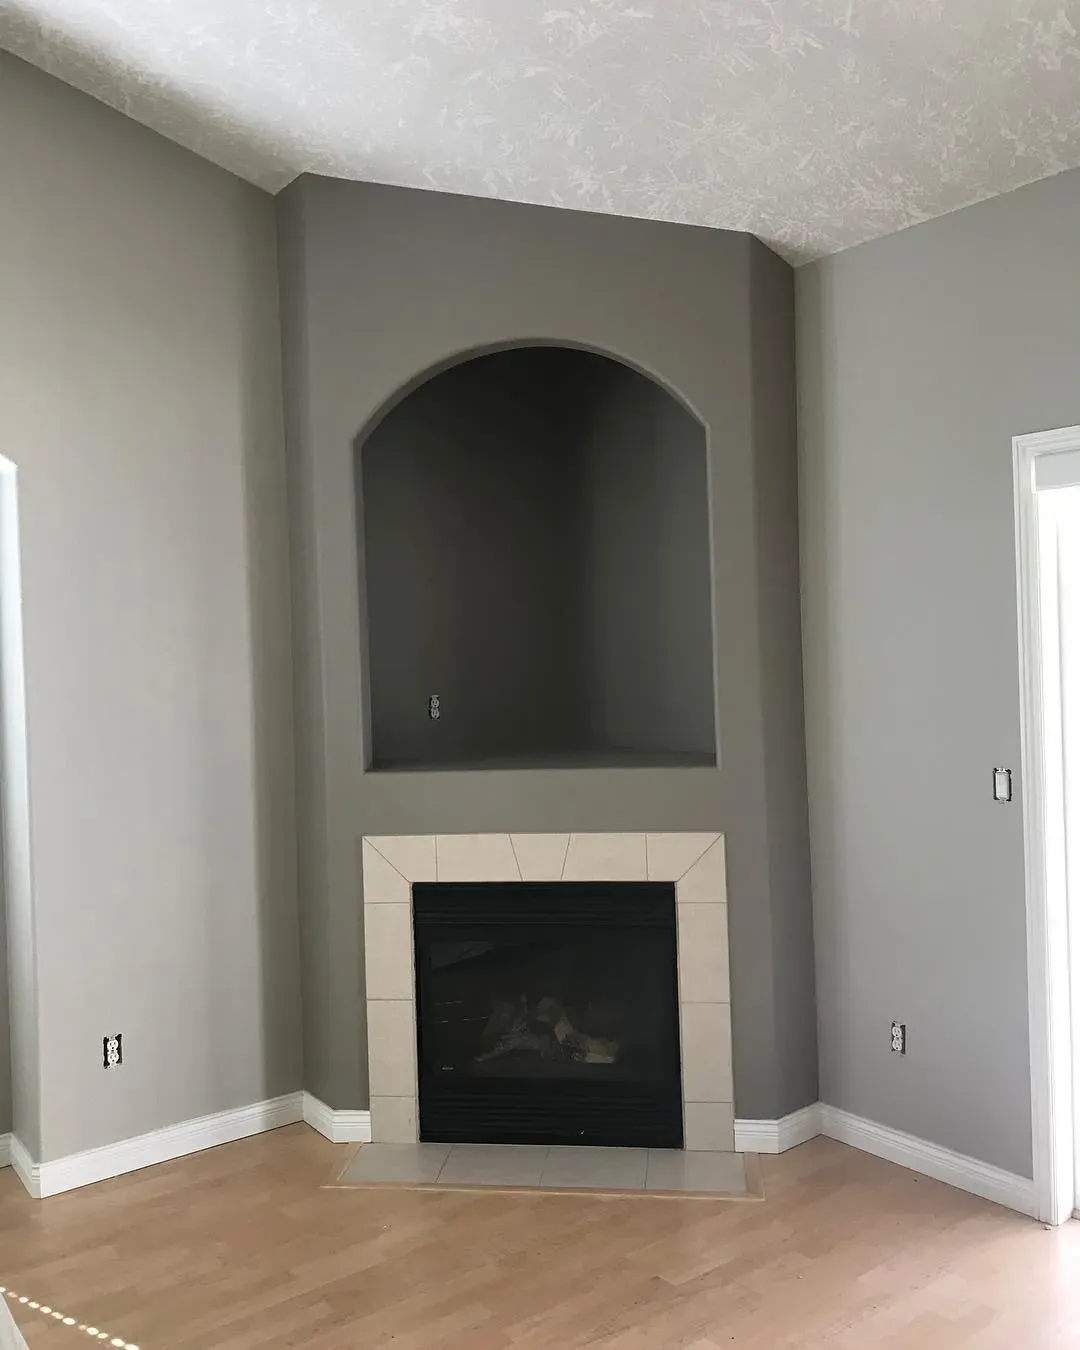 Sherwin Williams Pewter Tankard living room fireplace color